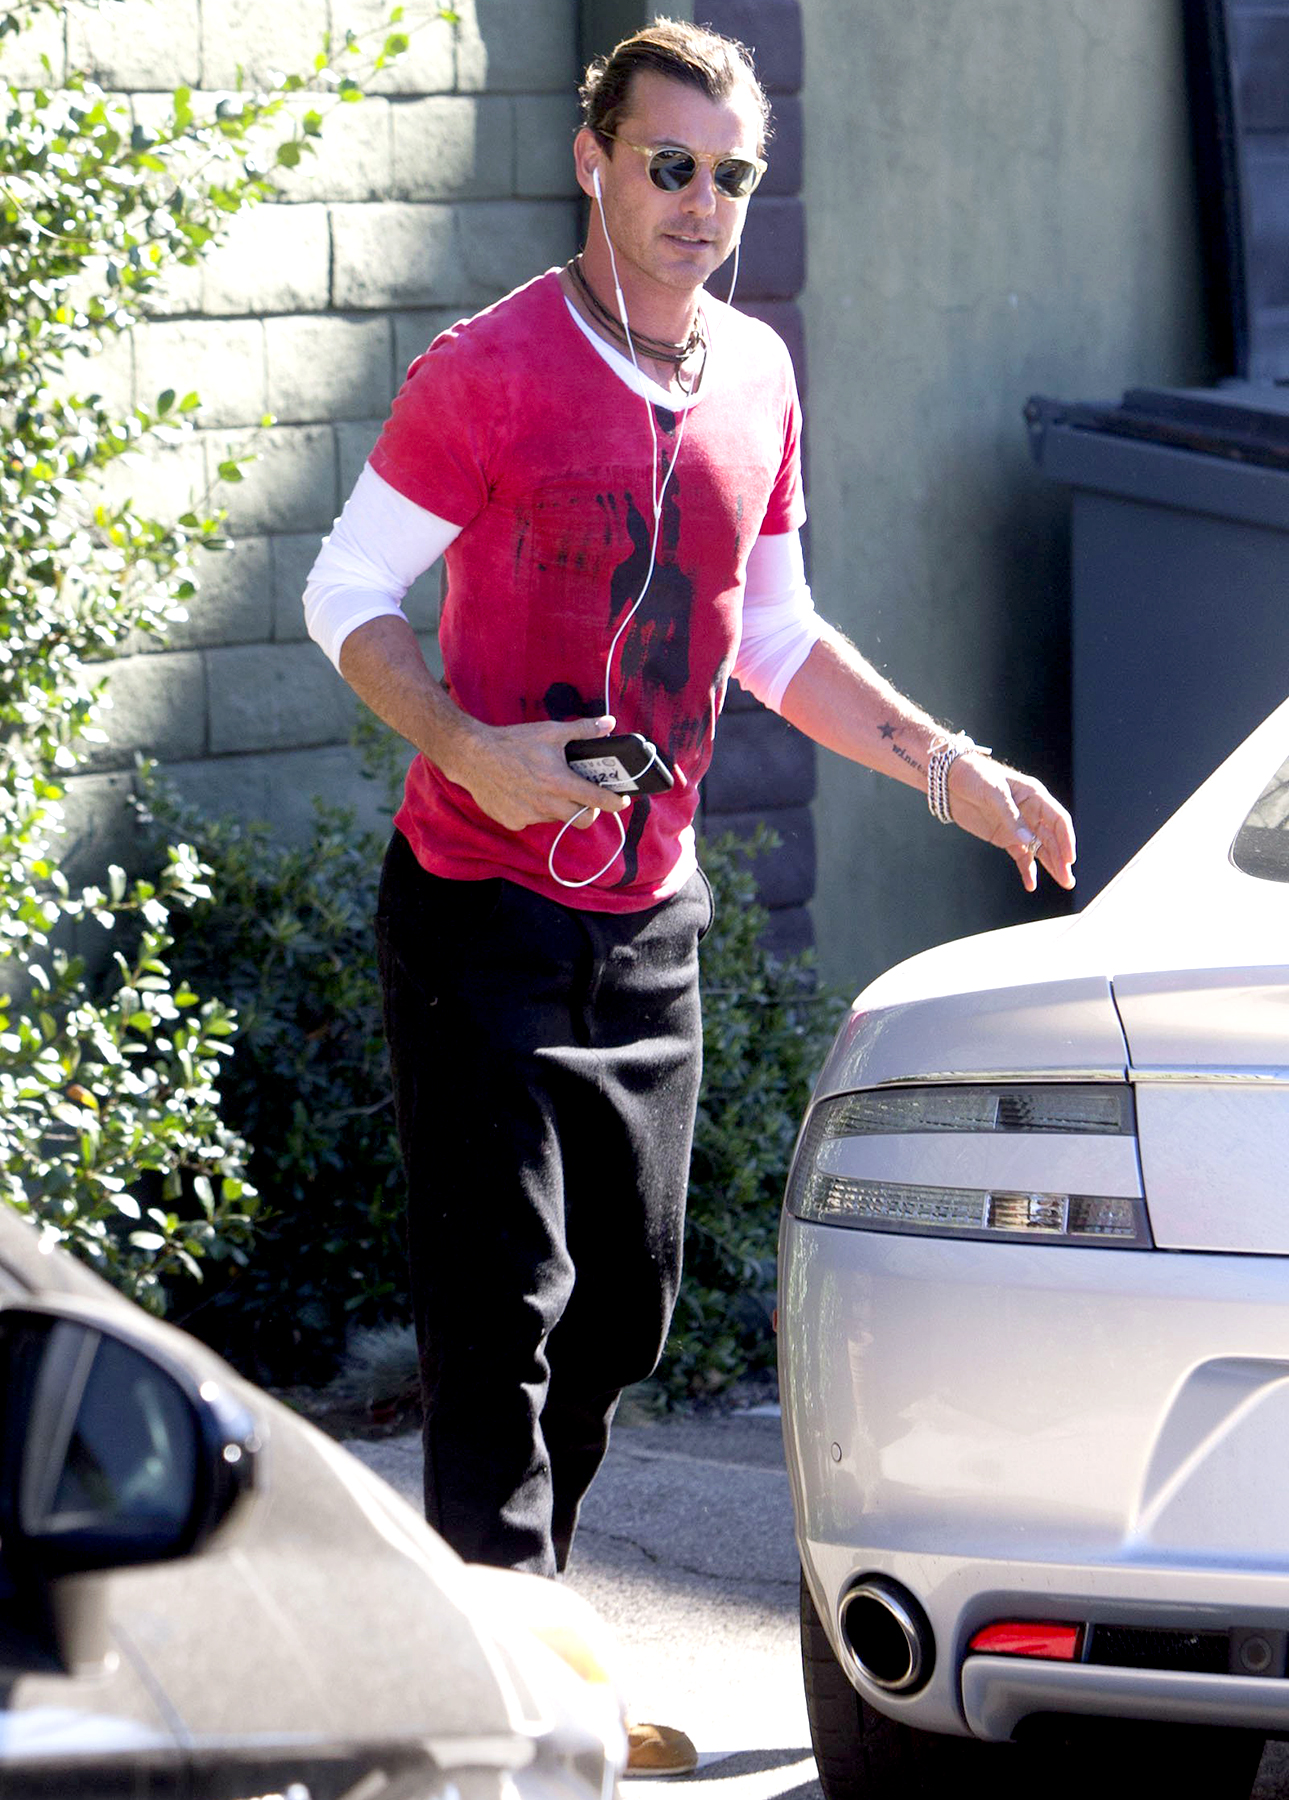 Gavin Rossdale Steps Out Wearing Band on Ring Finger After Affair News